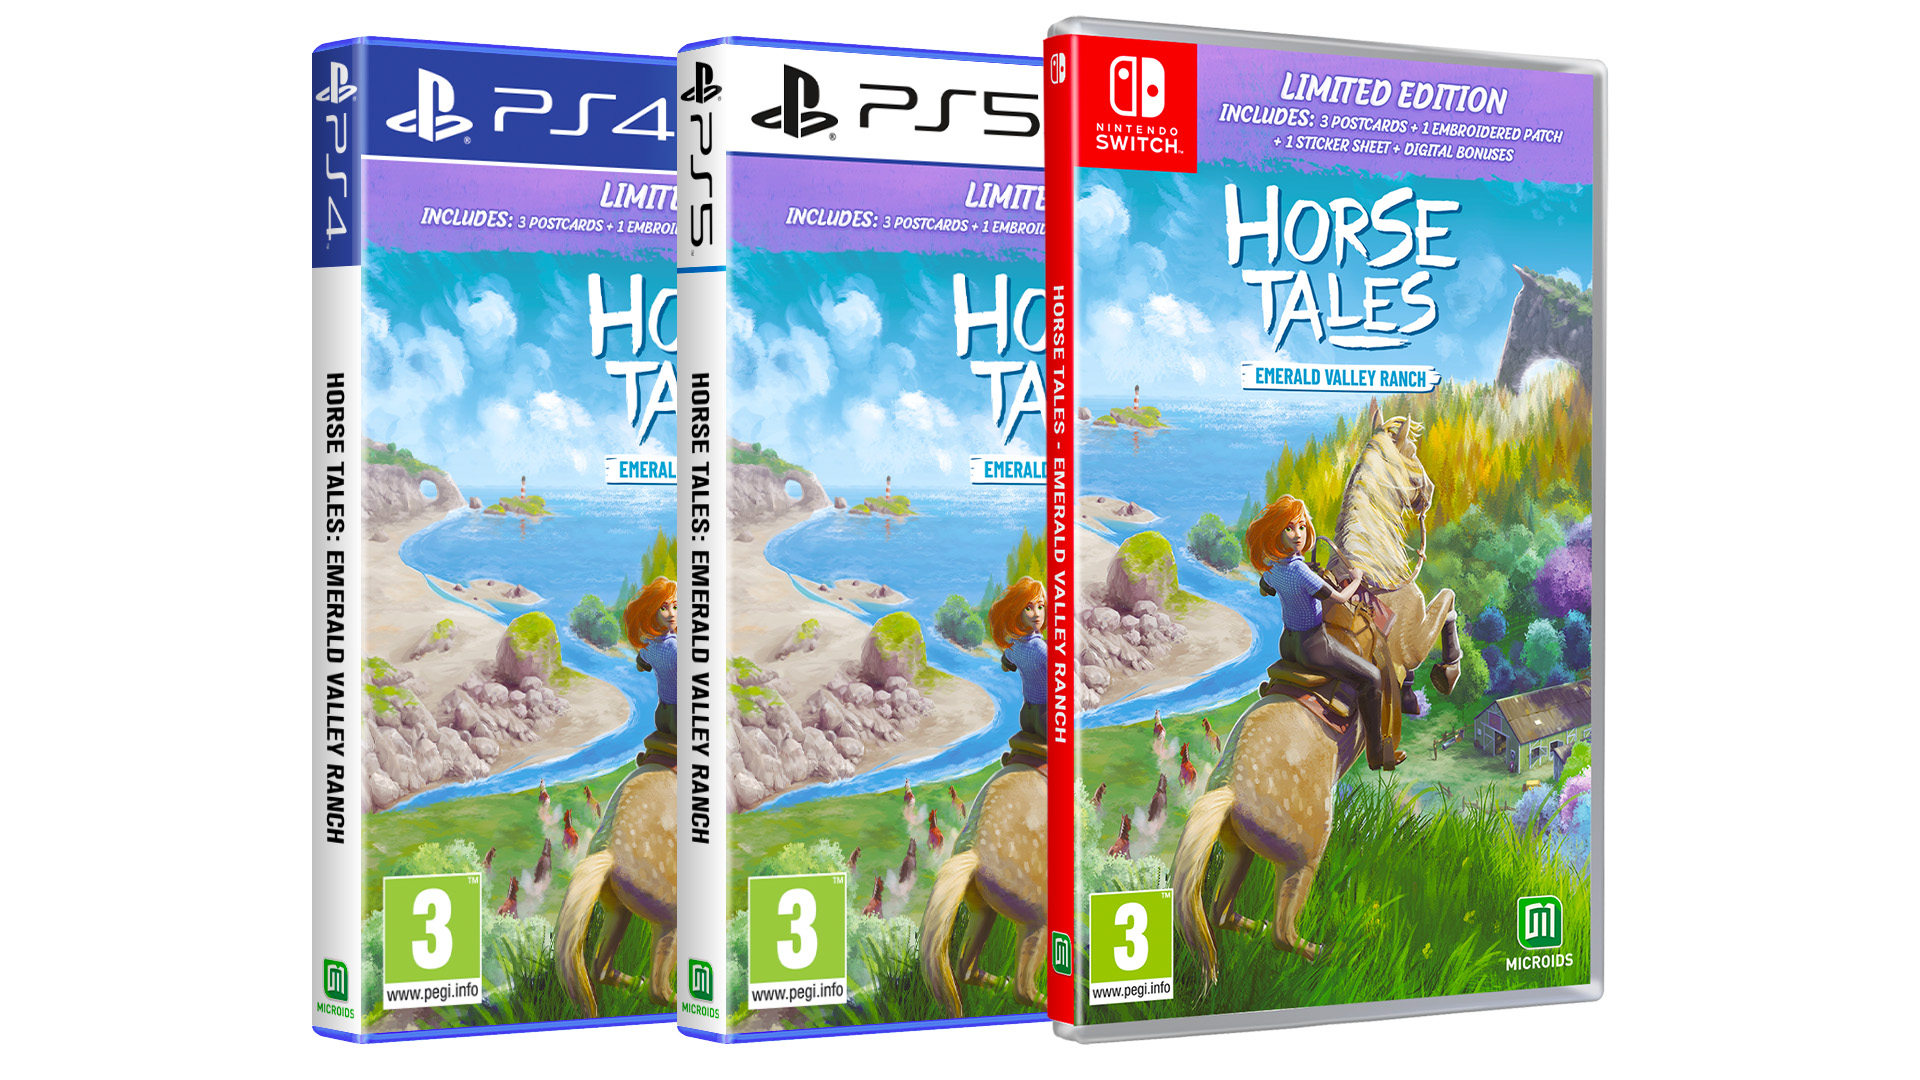 Horse Tales: Emerald Valley Ranch - Limited Edition